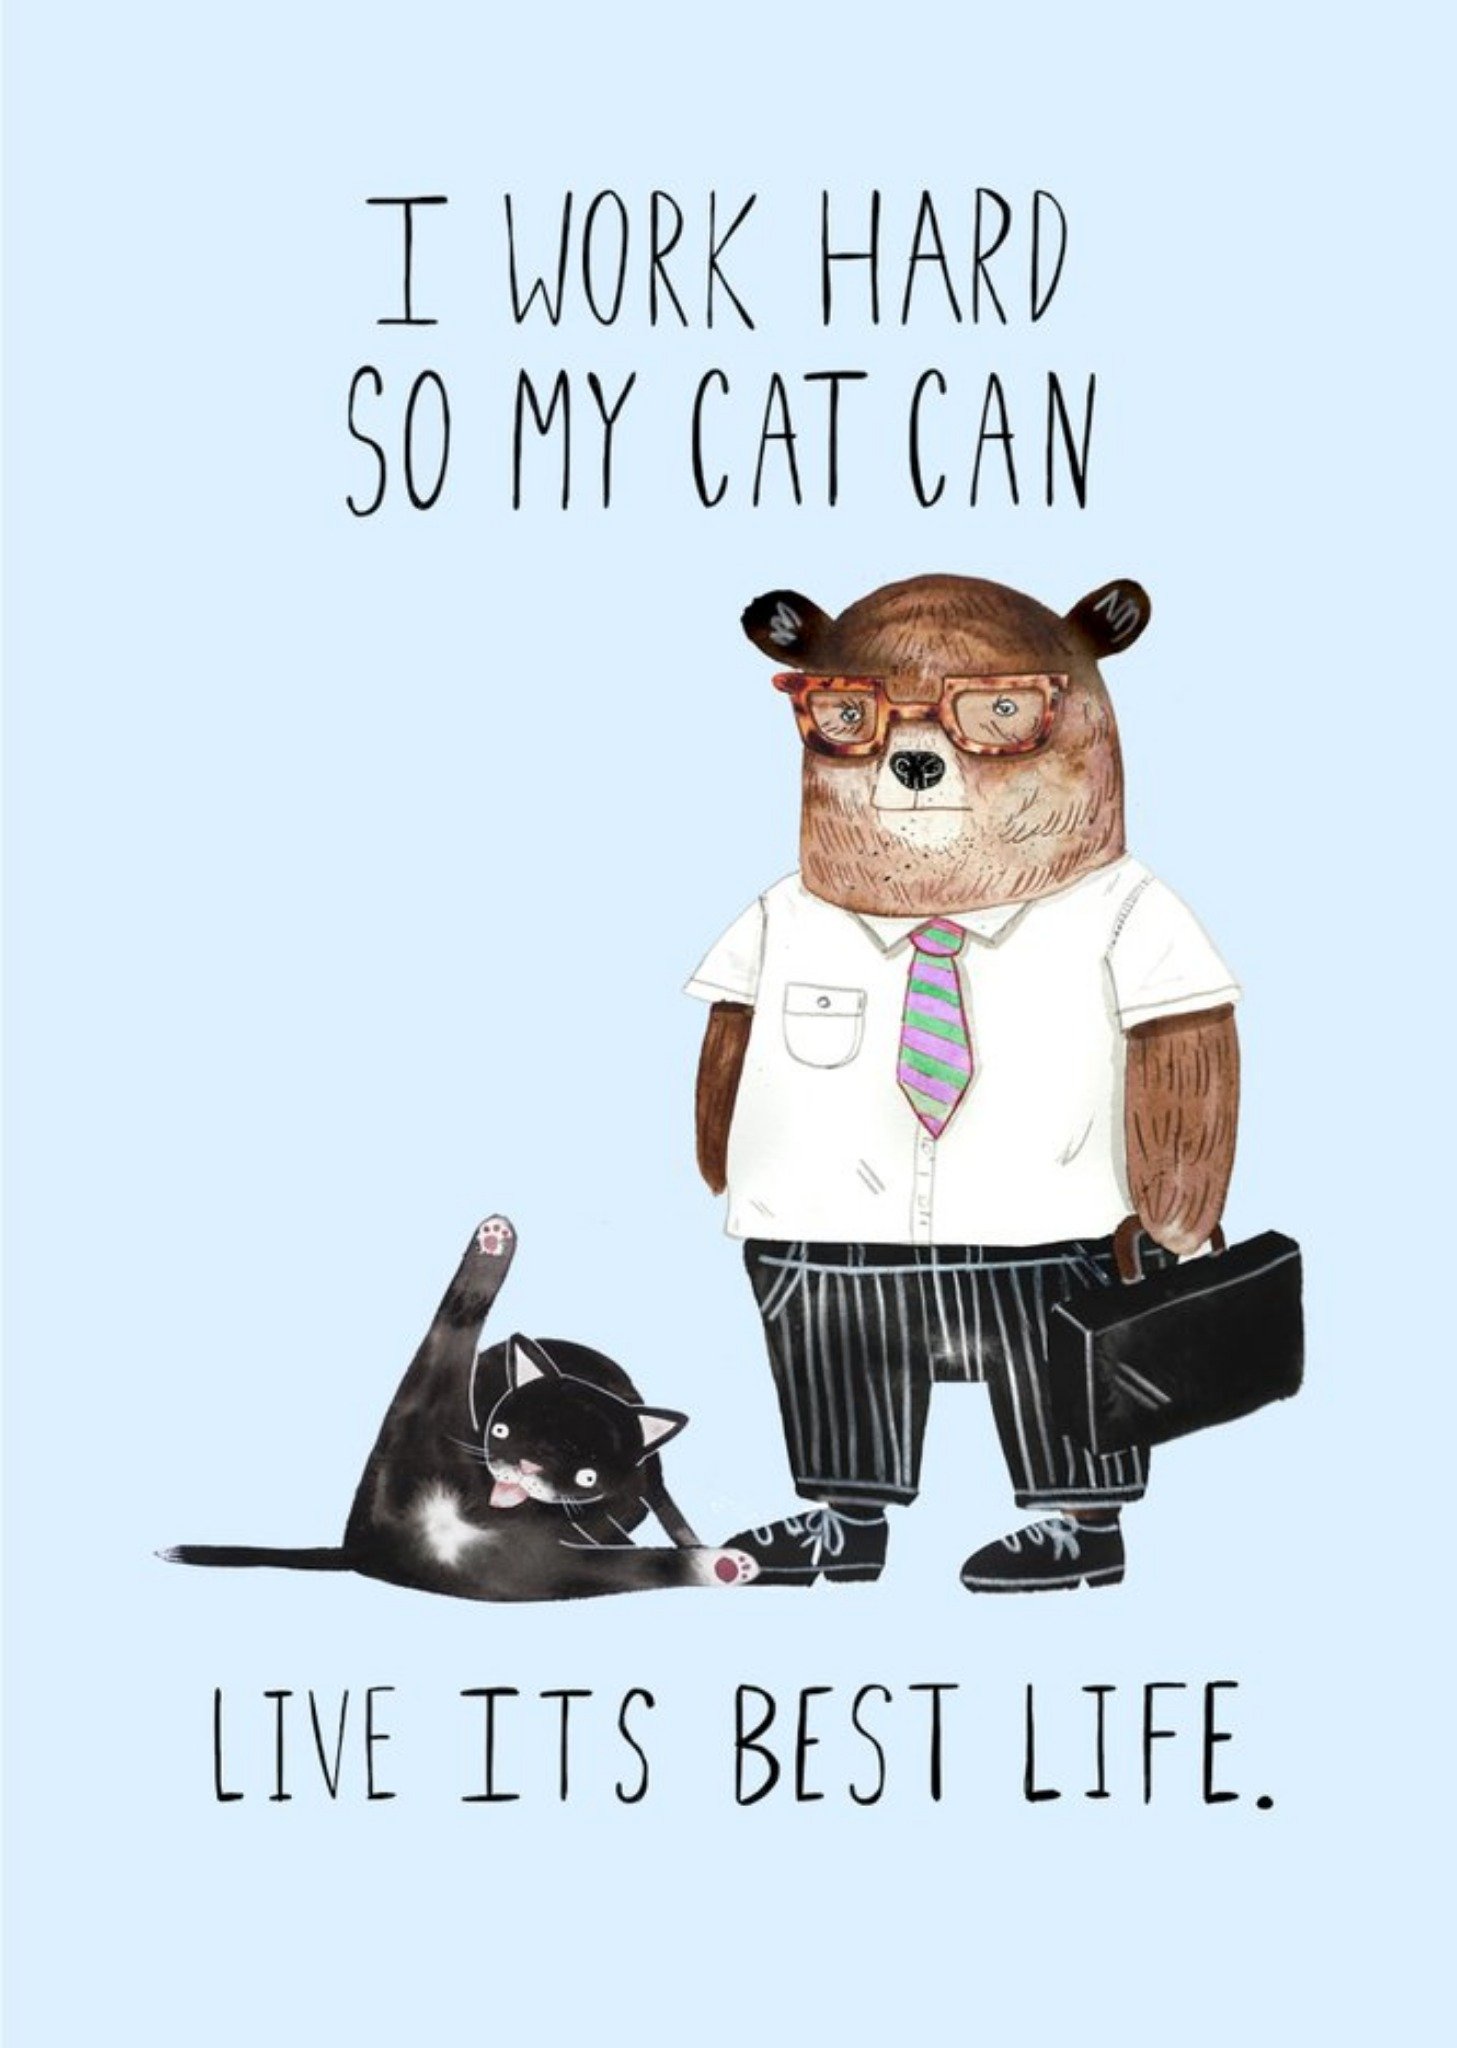 Jolly Awesome Live It's Best Life Birthday Cat Card Ecard